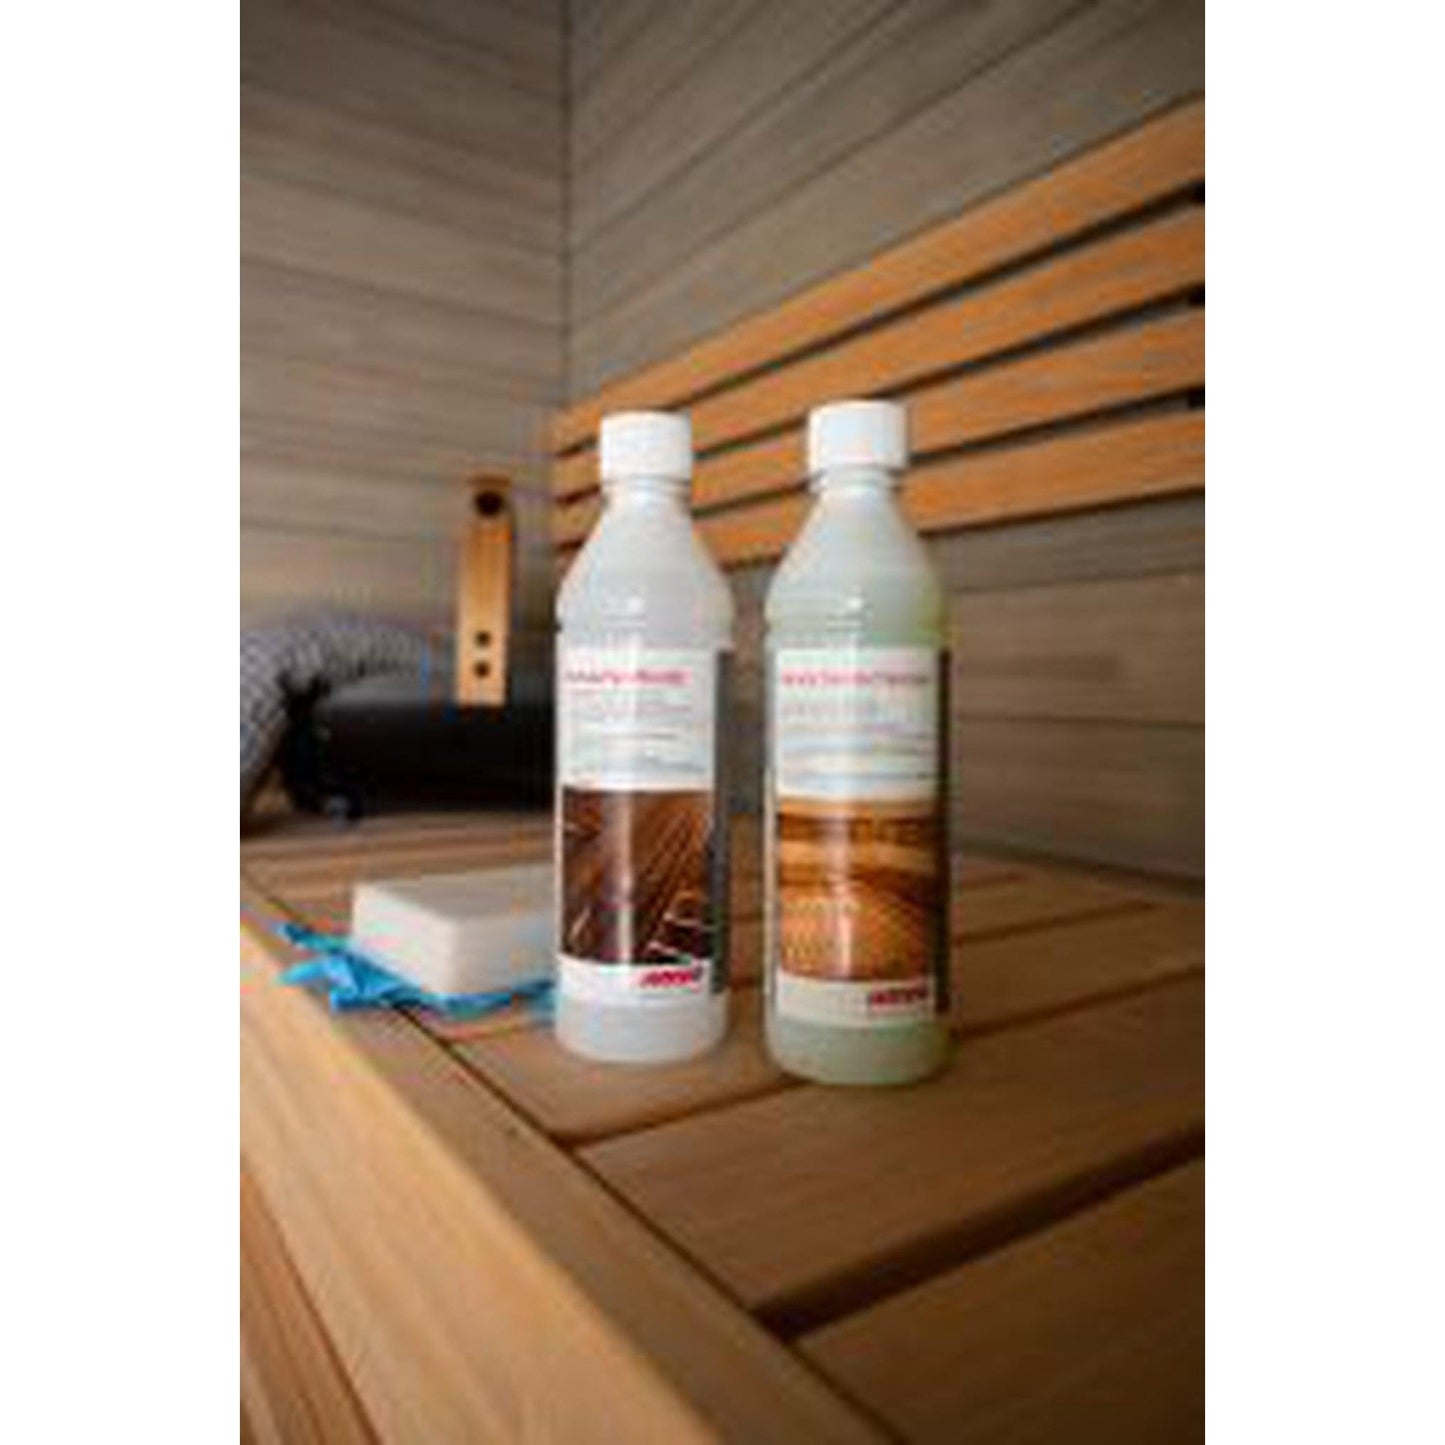 Harvia 500ML Sauna Wood Paraffin Oil For Wood Benches